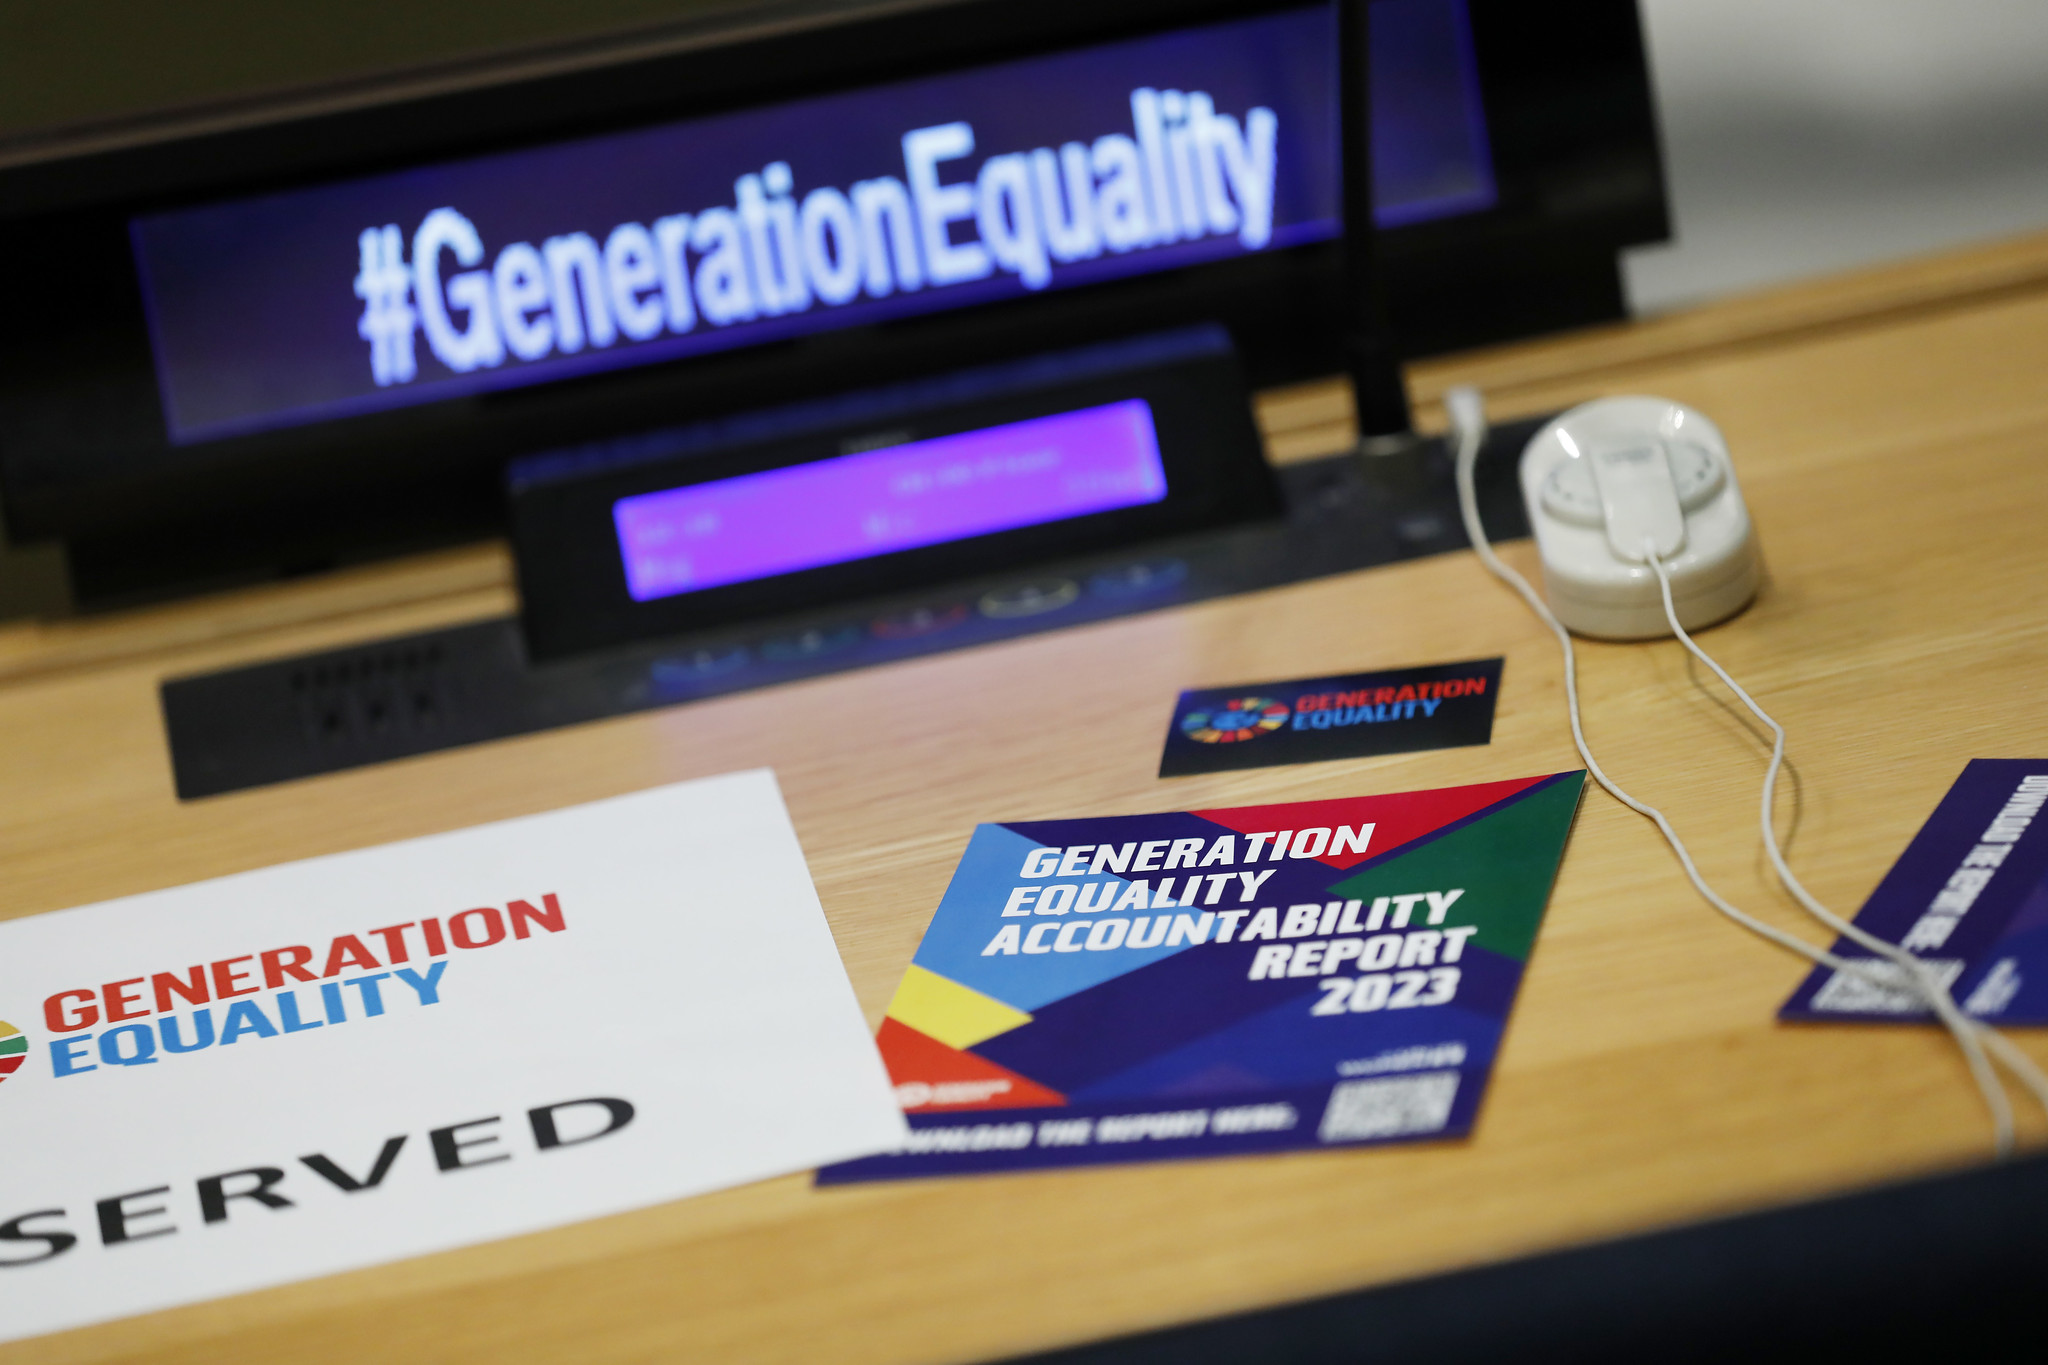 Generation Equality Midpoint Moment, September 2023, UN Headquarters New York.